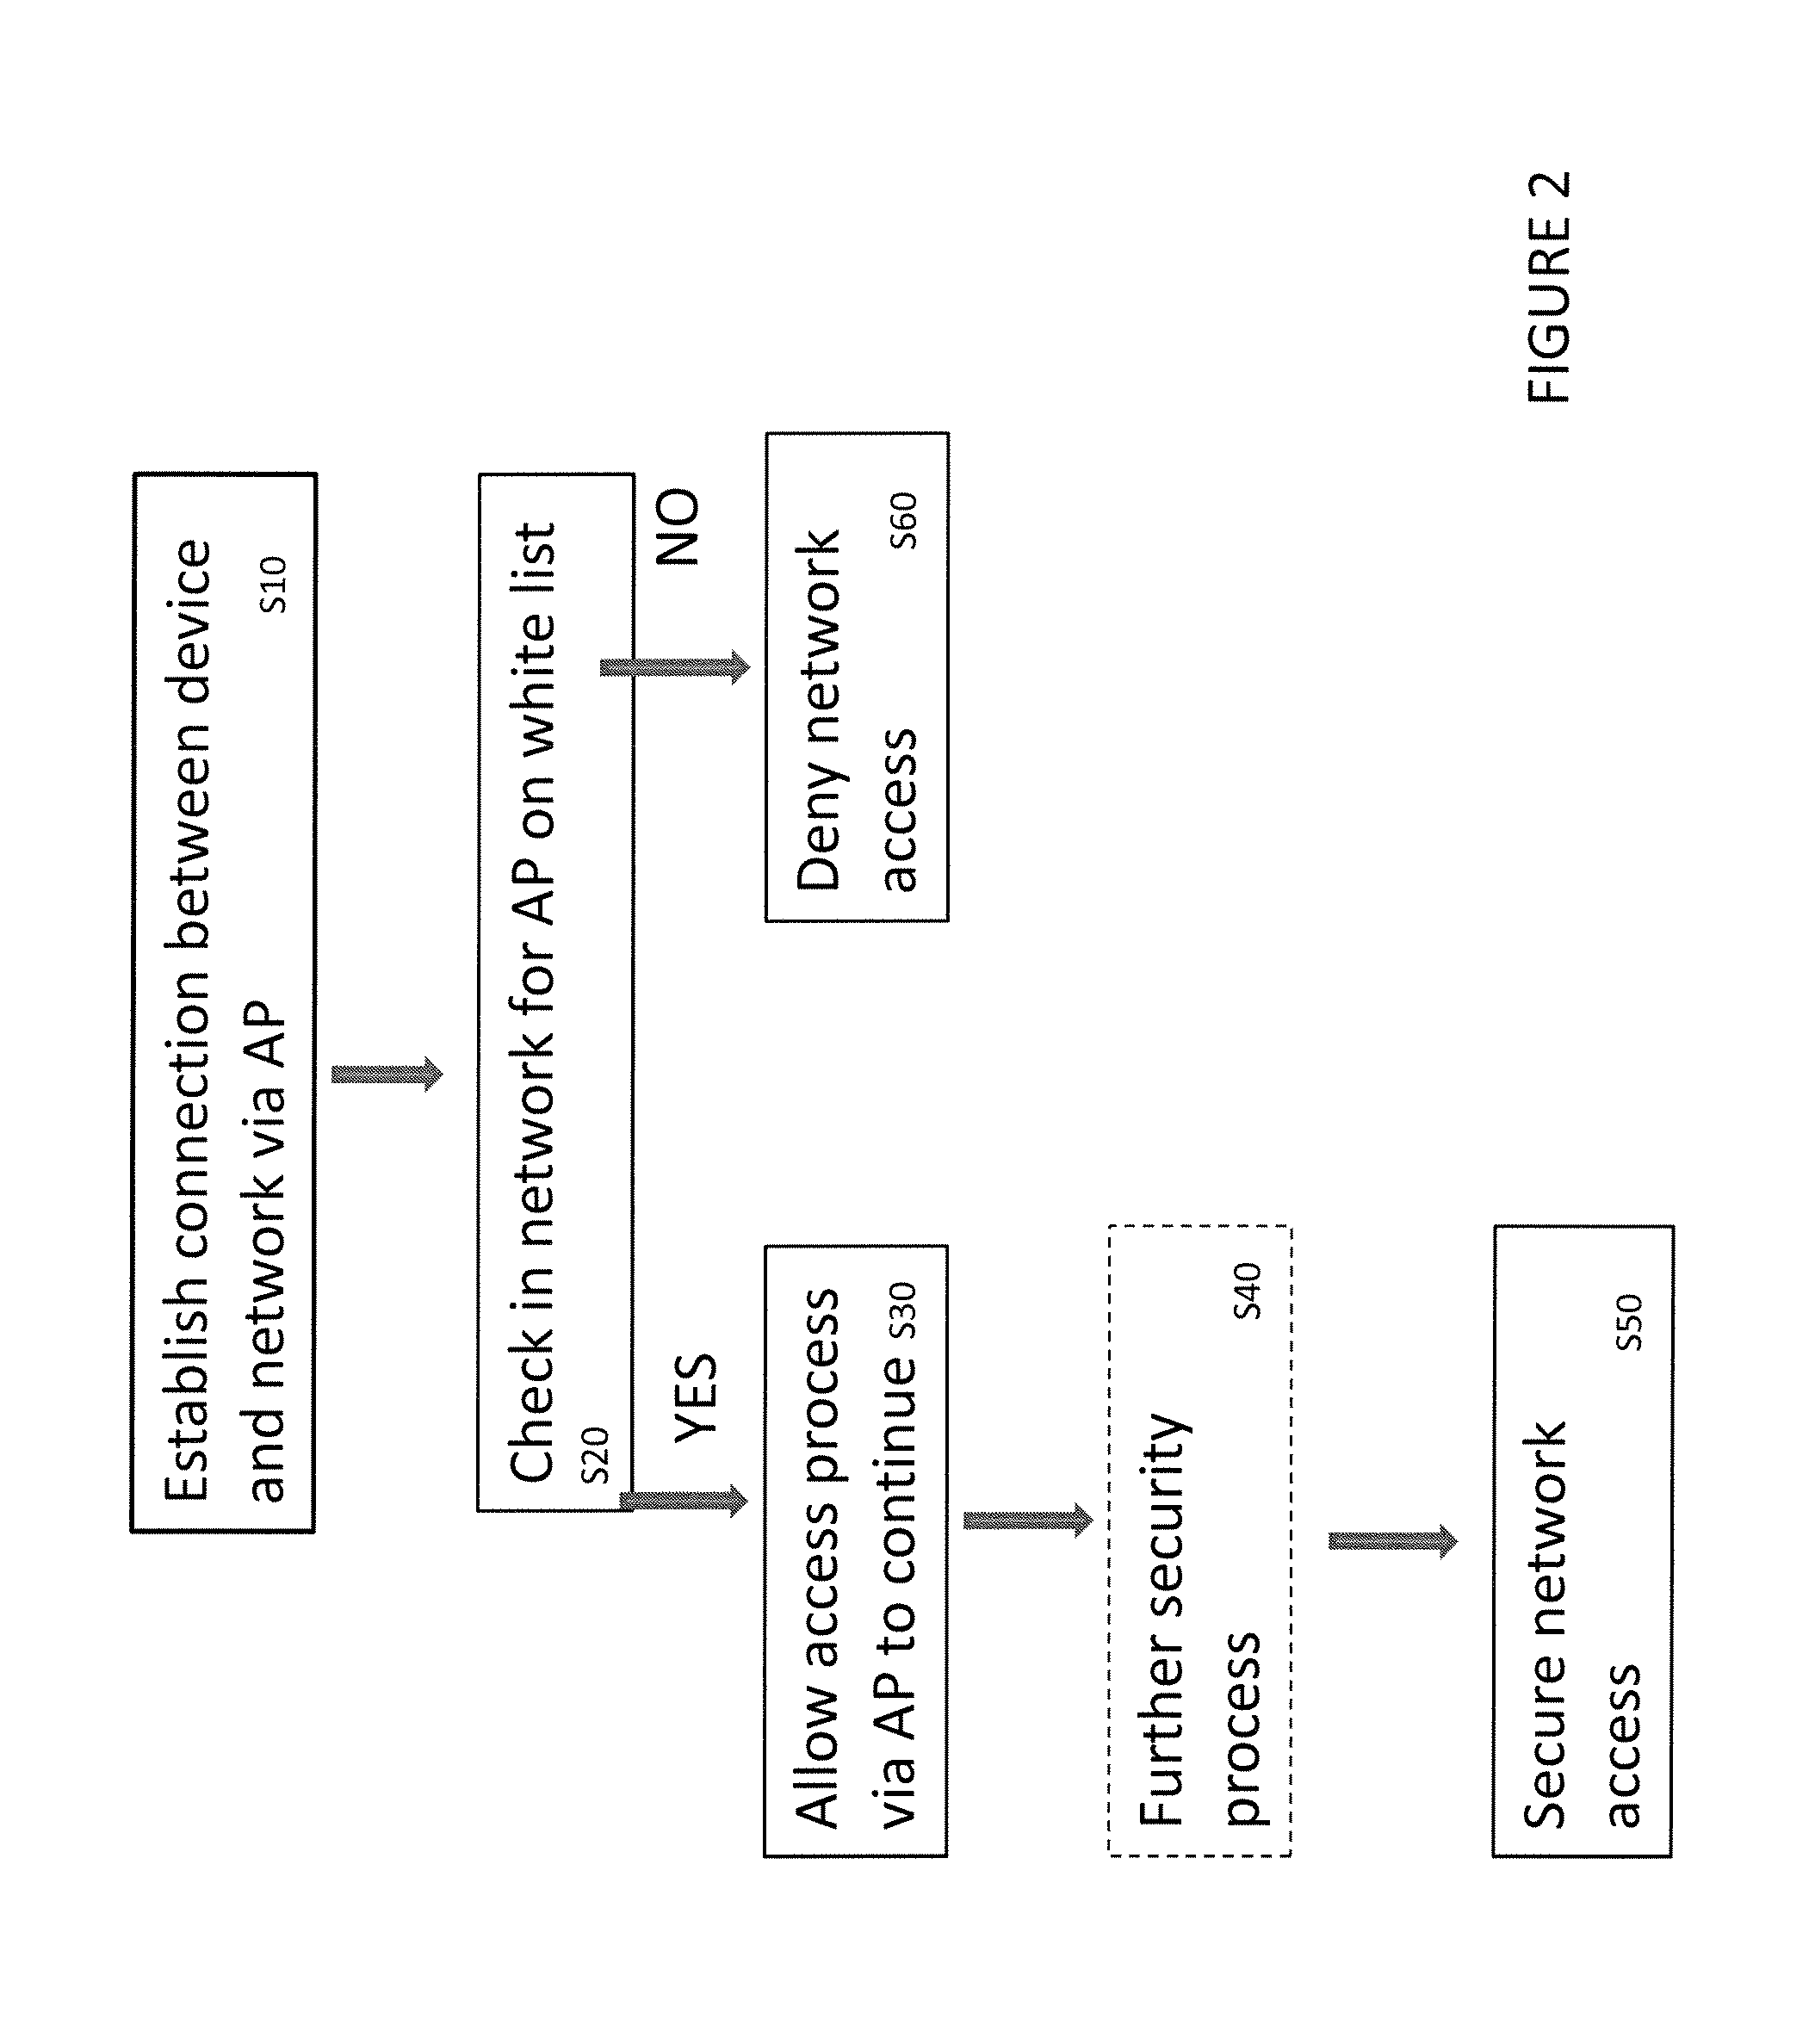 Method of accessing a network securely from a personal device, a personal device, a network server and an access point